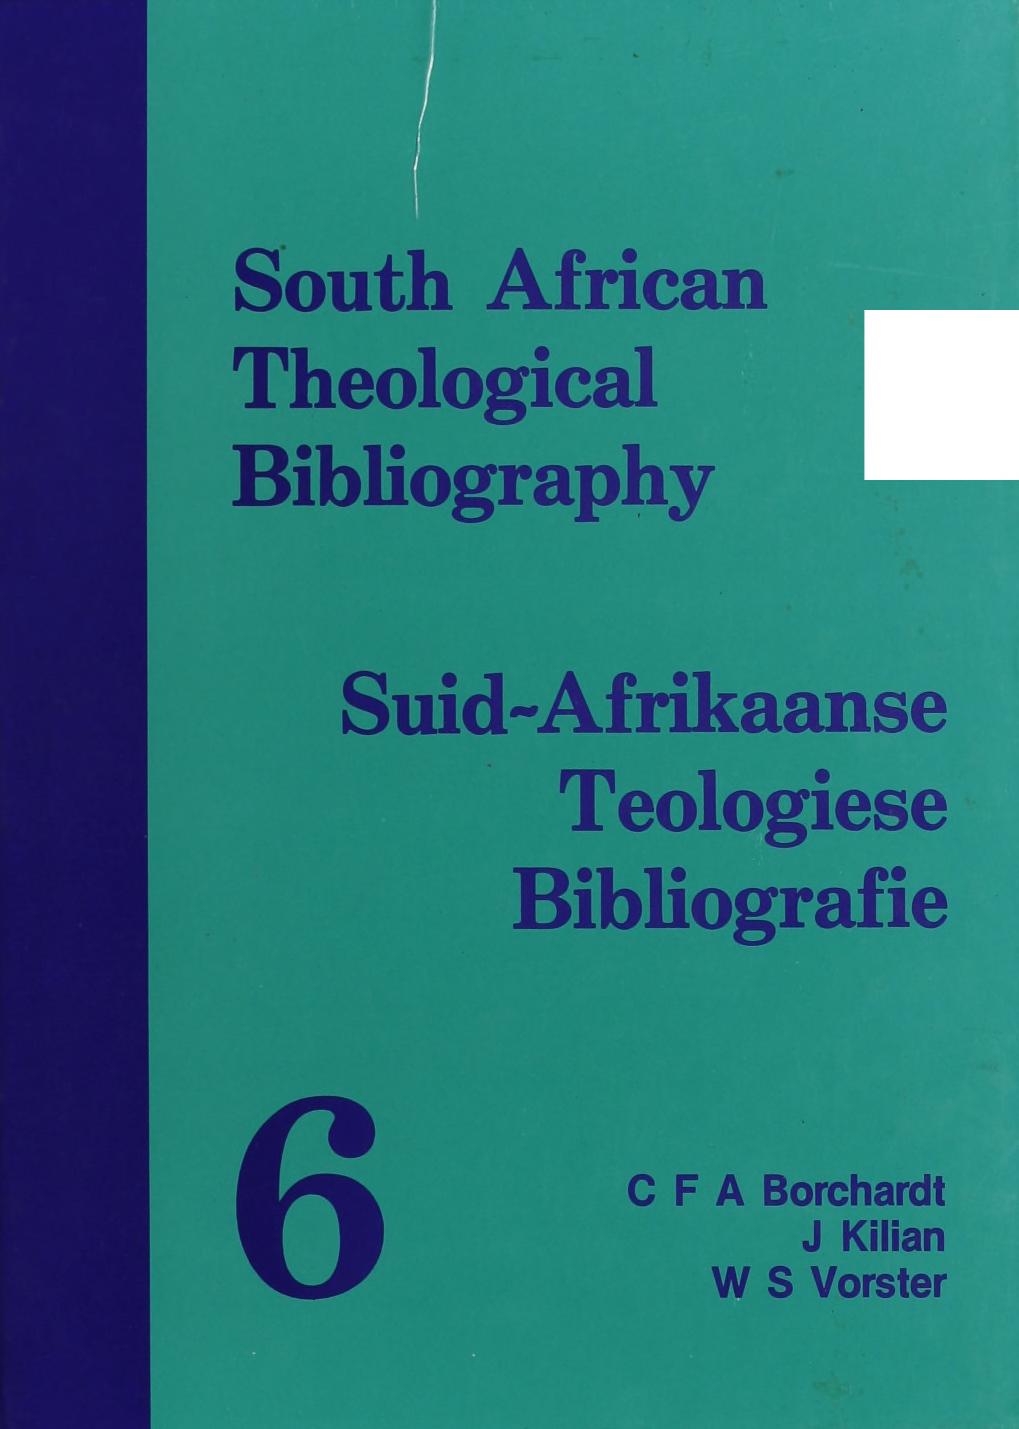 South African Theological